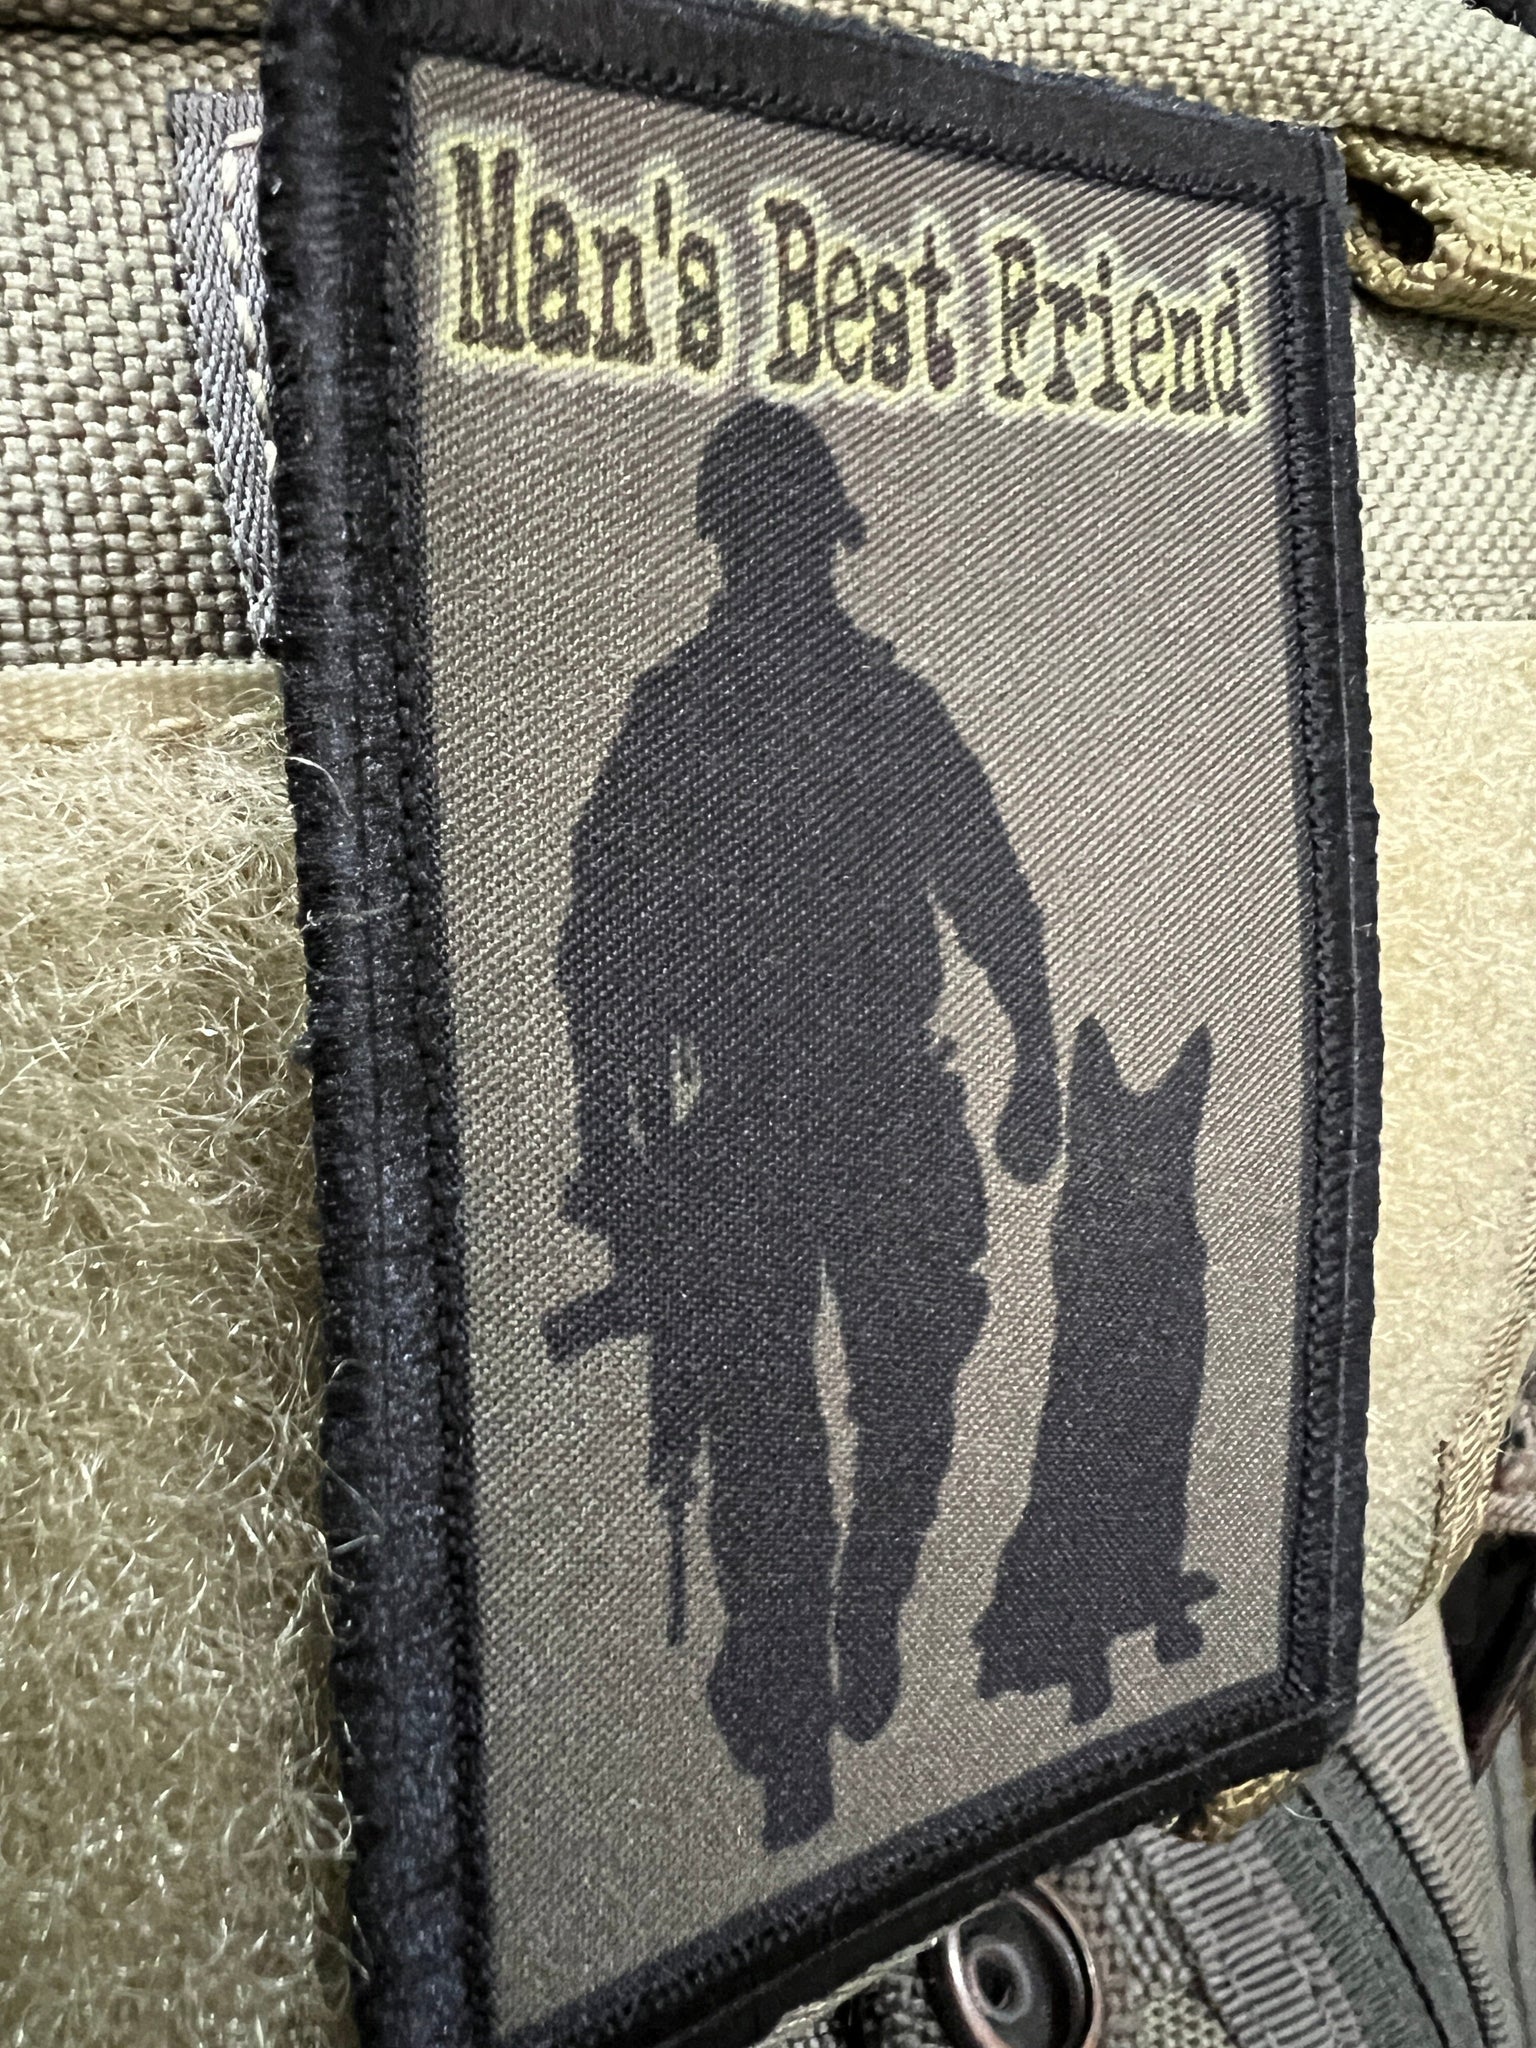 Man's Best Friend Subdued K9 Morale Patch Morale Patches Redheaded T Shirts 